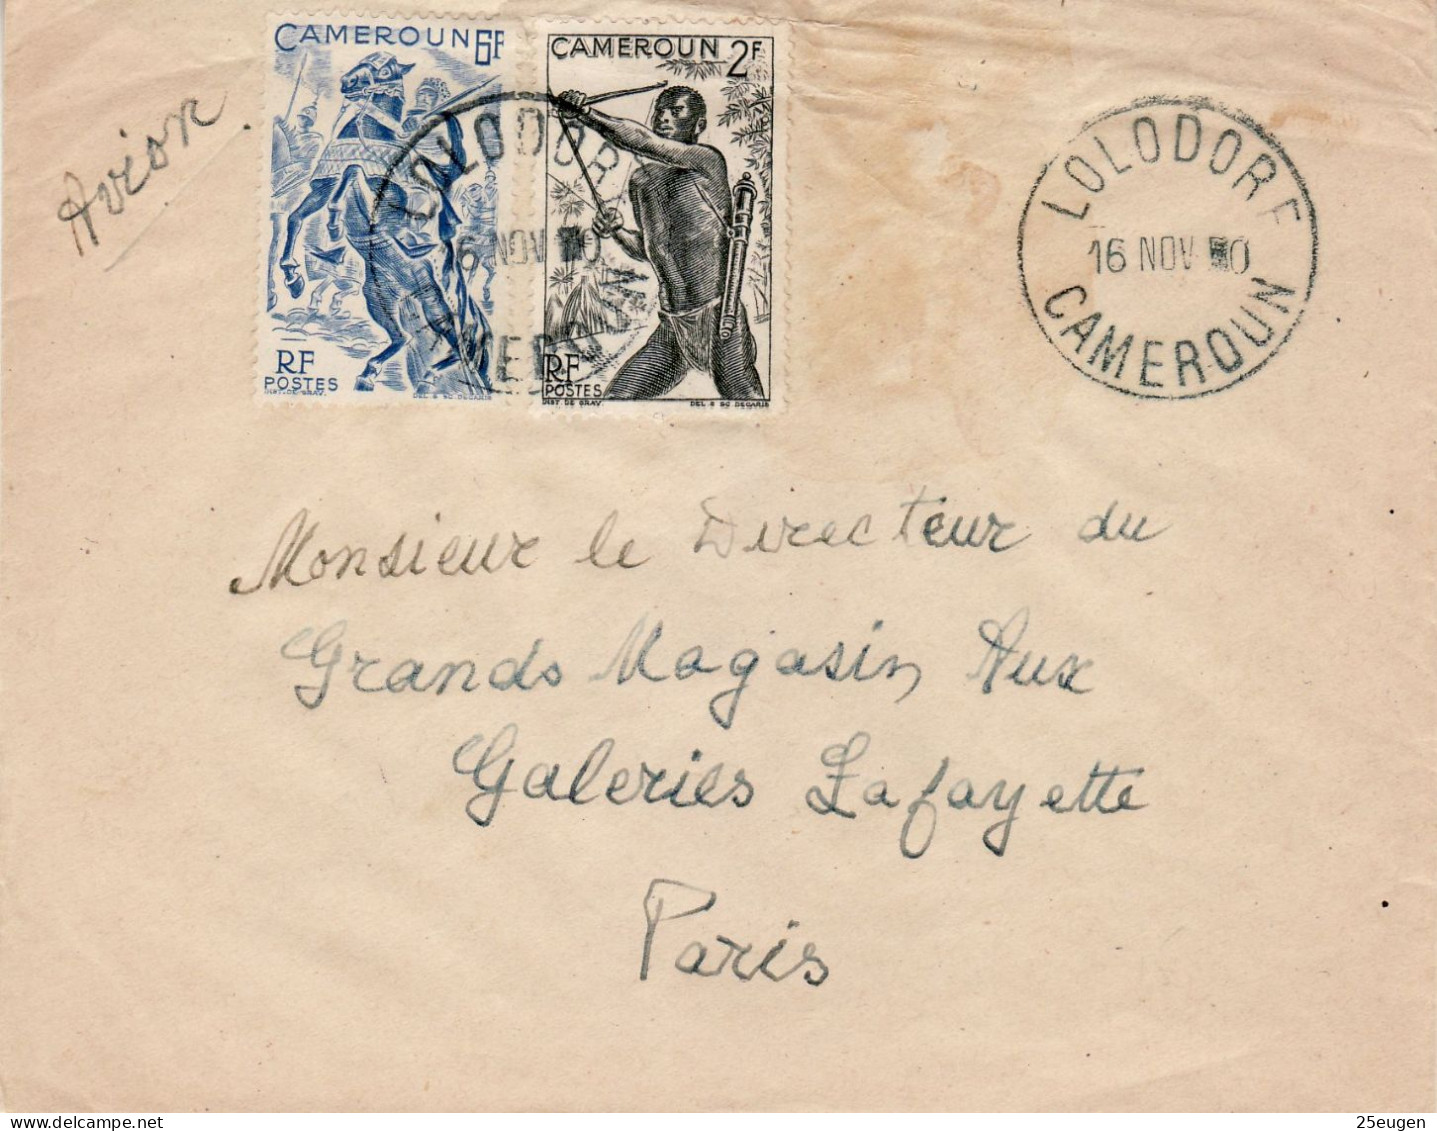 CAMEROUN 1950 AIRMAIL LETTER SENT FROM LOLODORE TO PARIS - Lettres & Documents